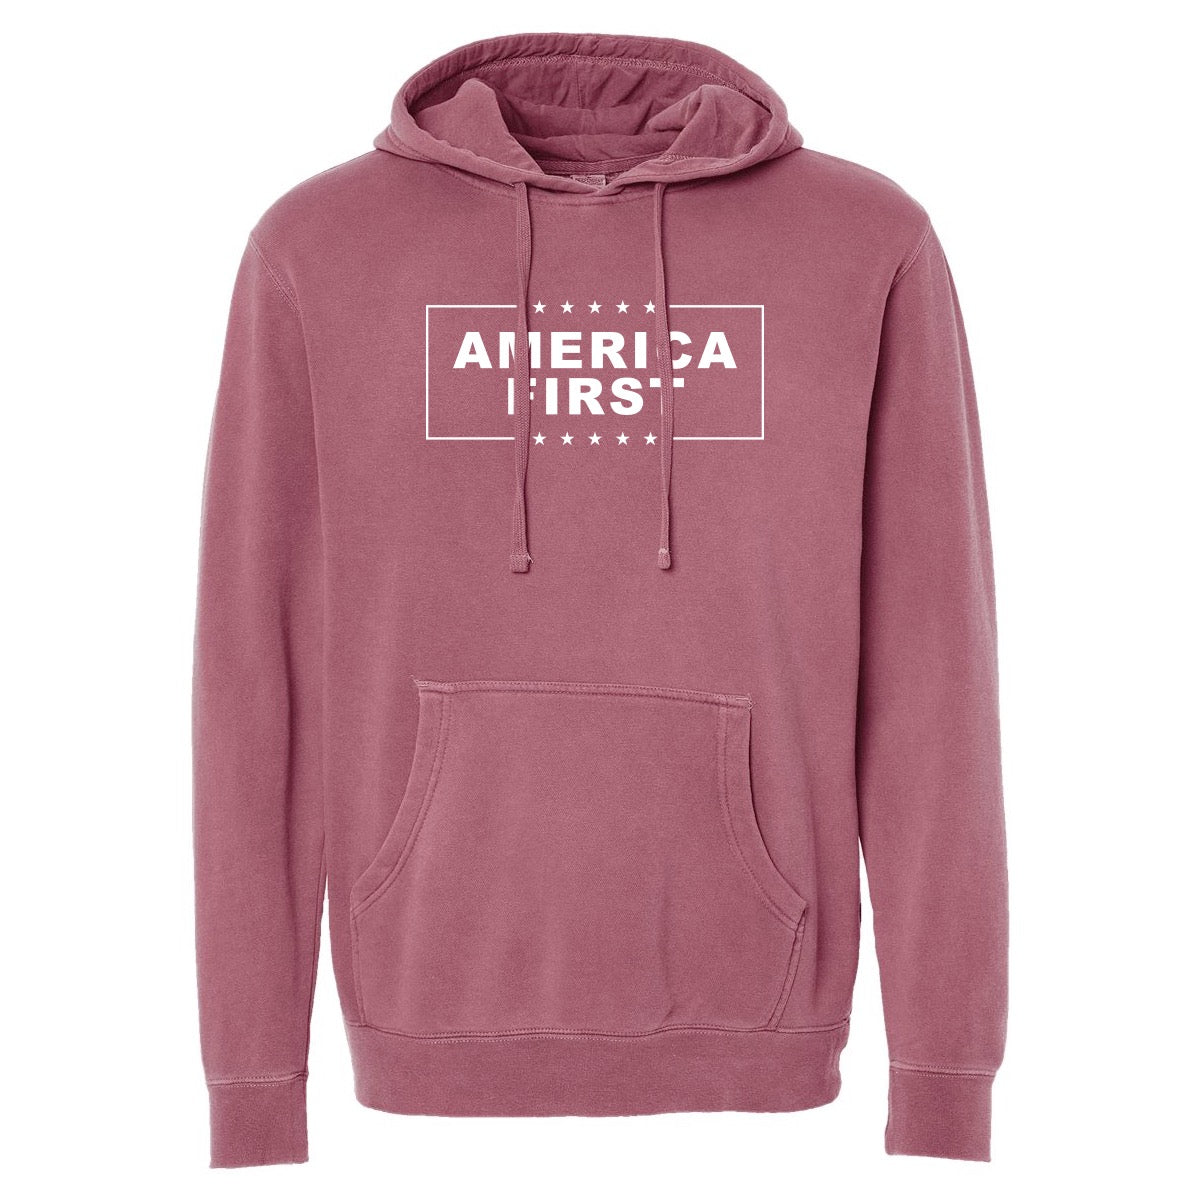 America First Pigment Dyed Premium Hoodie